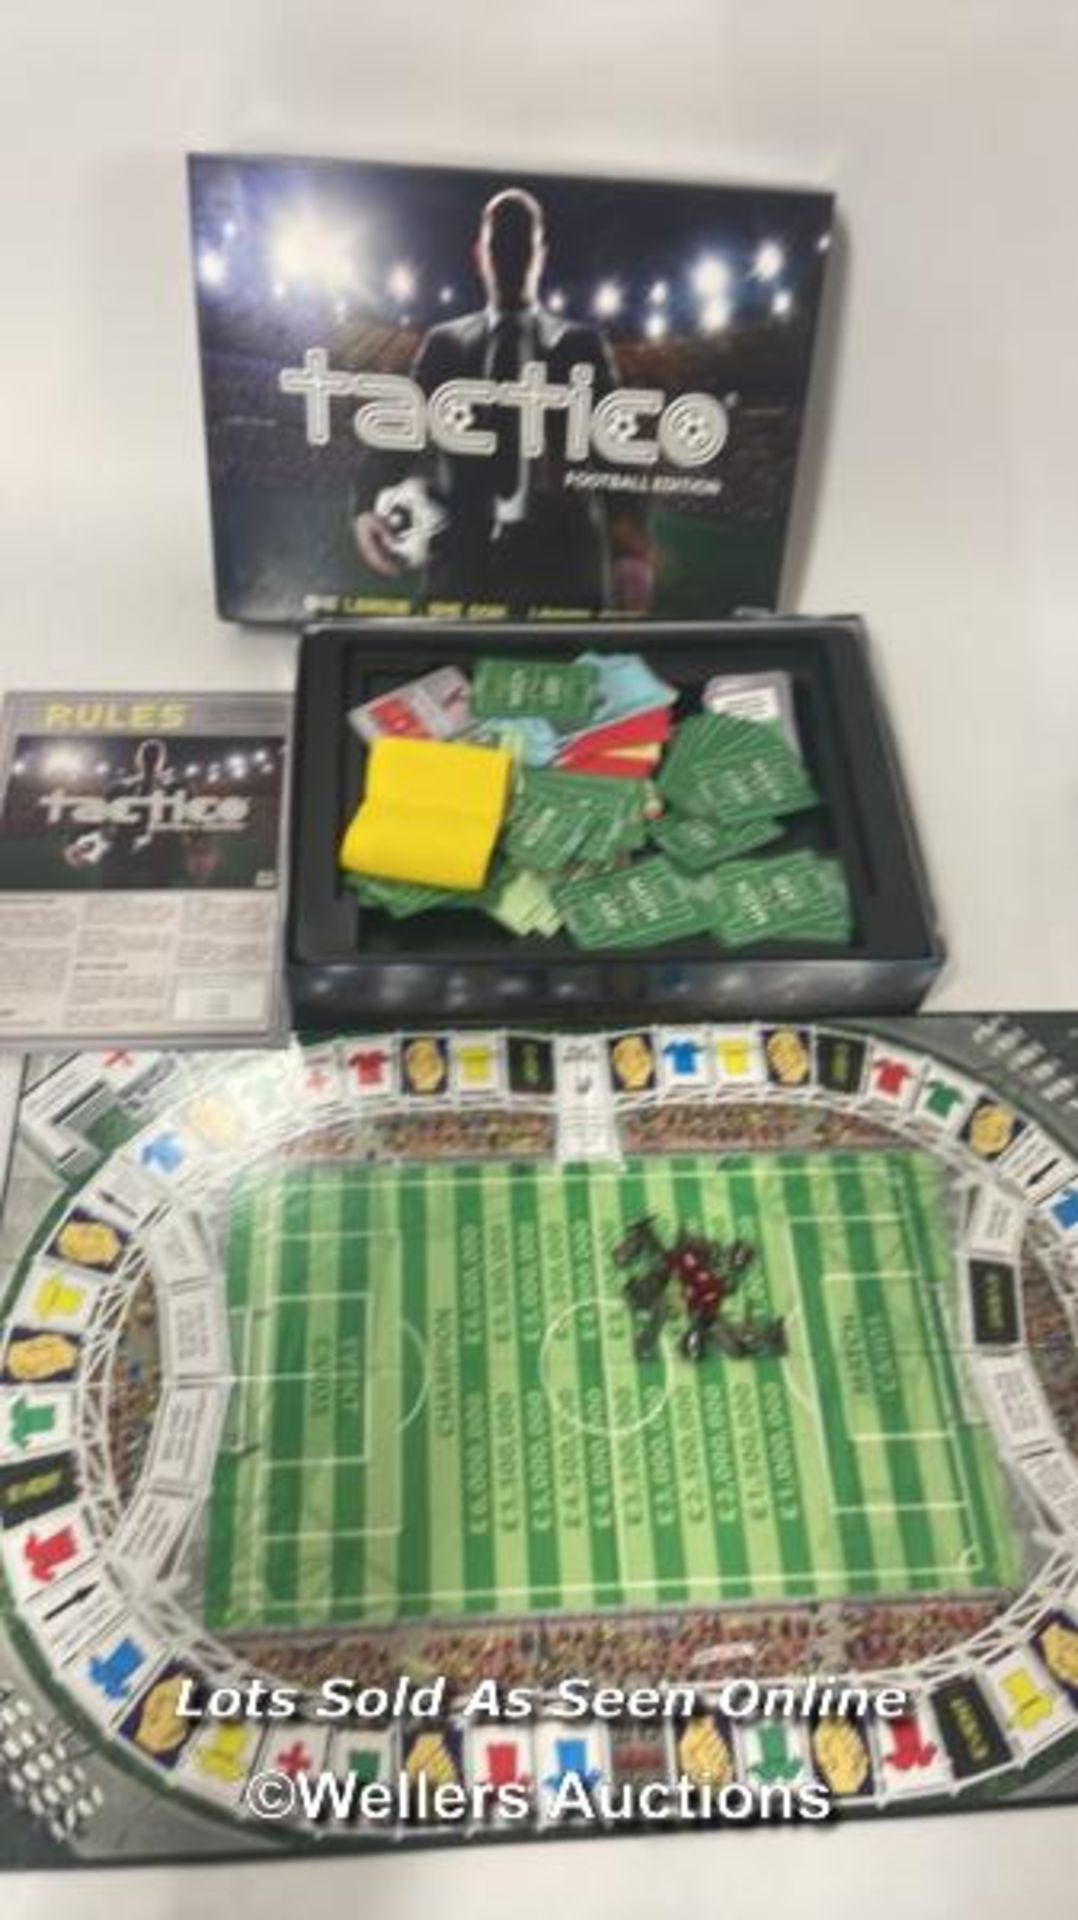 Tactico Football Edition board game, Guitar Rock and Total War Eras for Sega, unchecked - Image 3 of 6